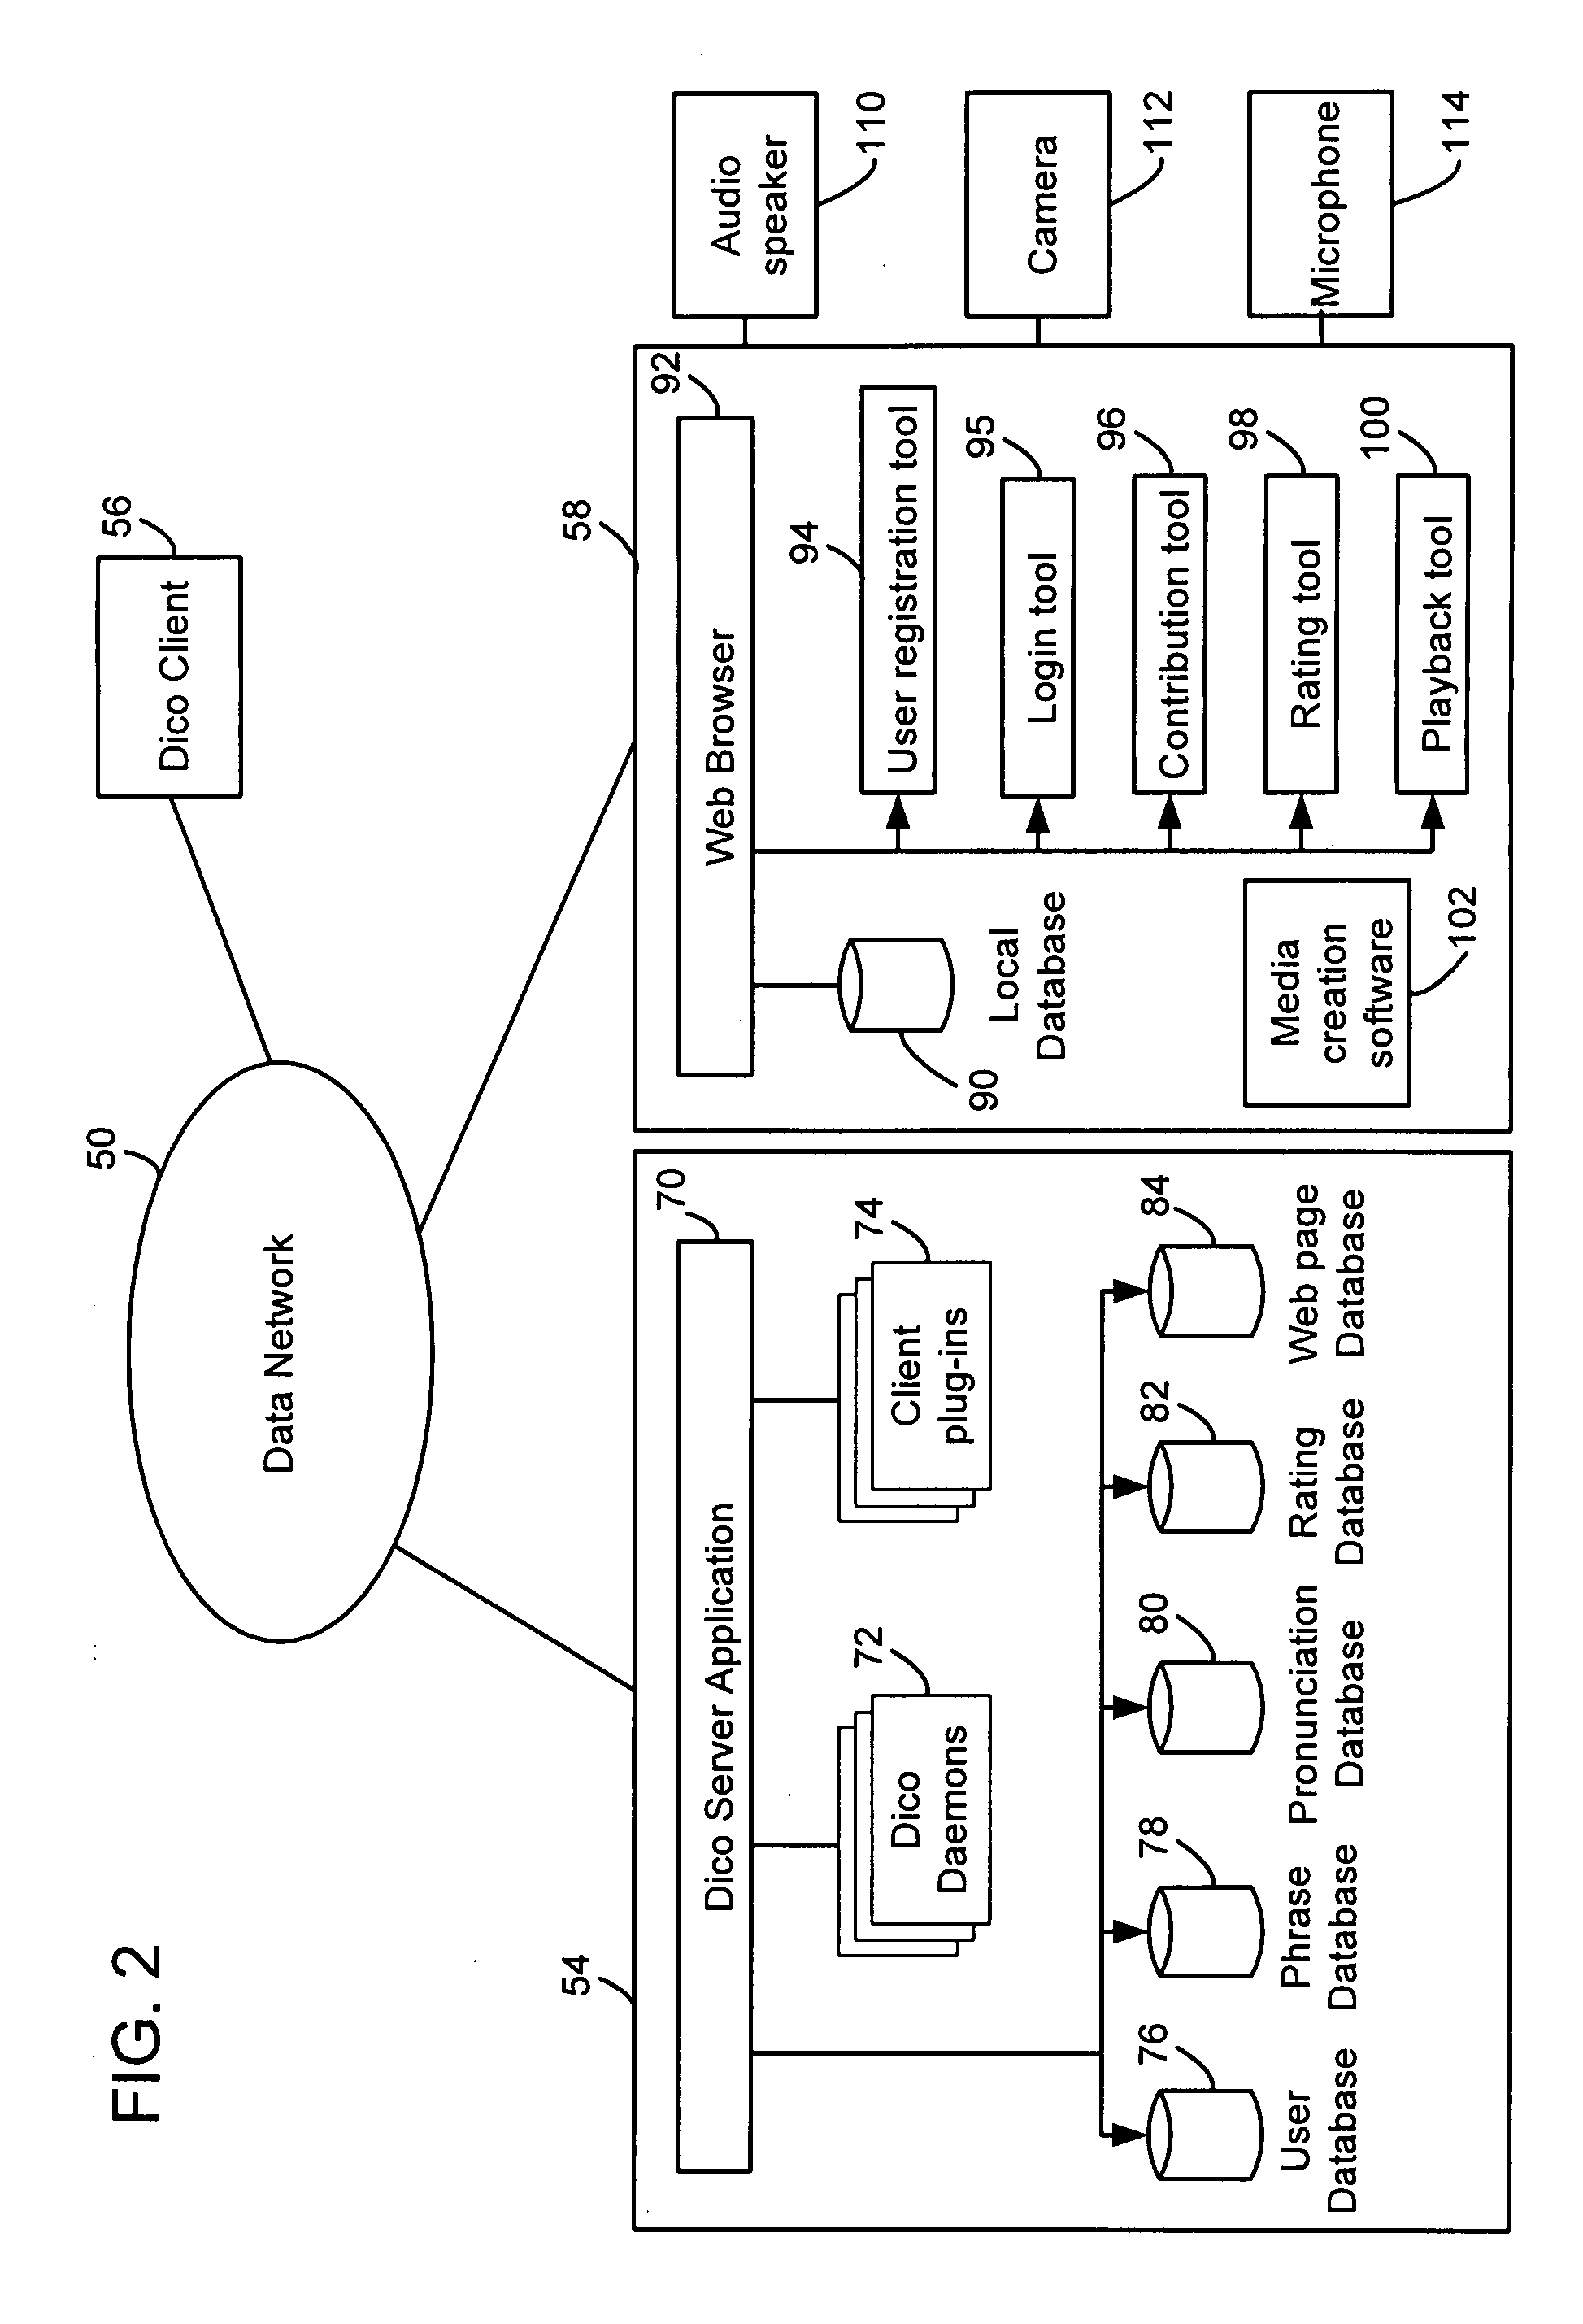 Method and System for Generating, Rating, and Storing a Pronunciation Corpus